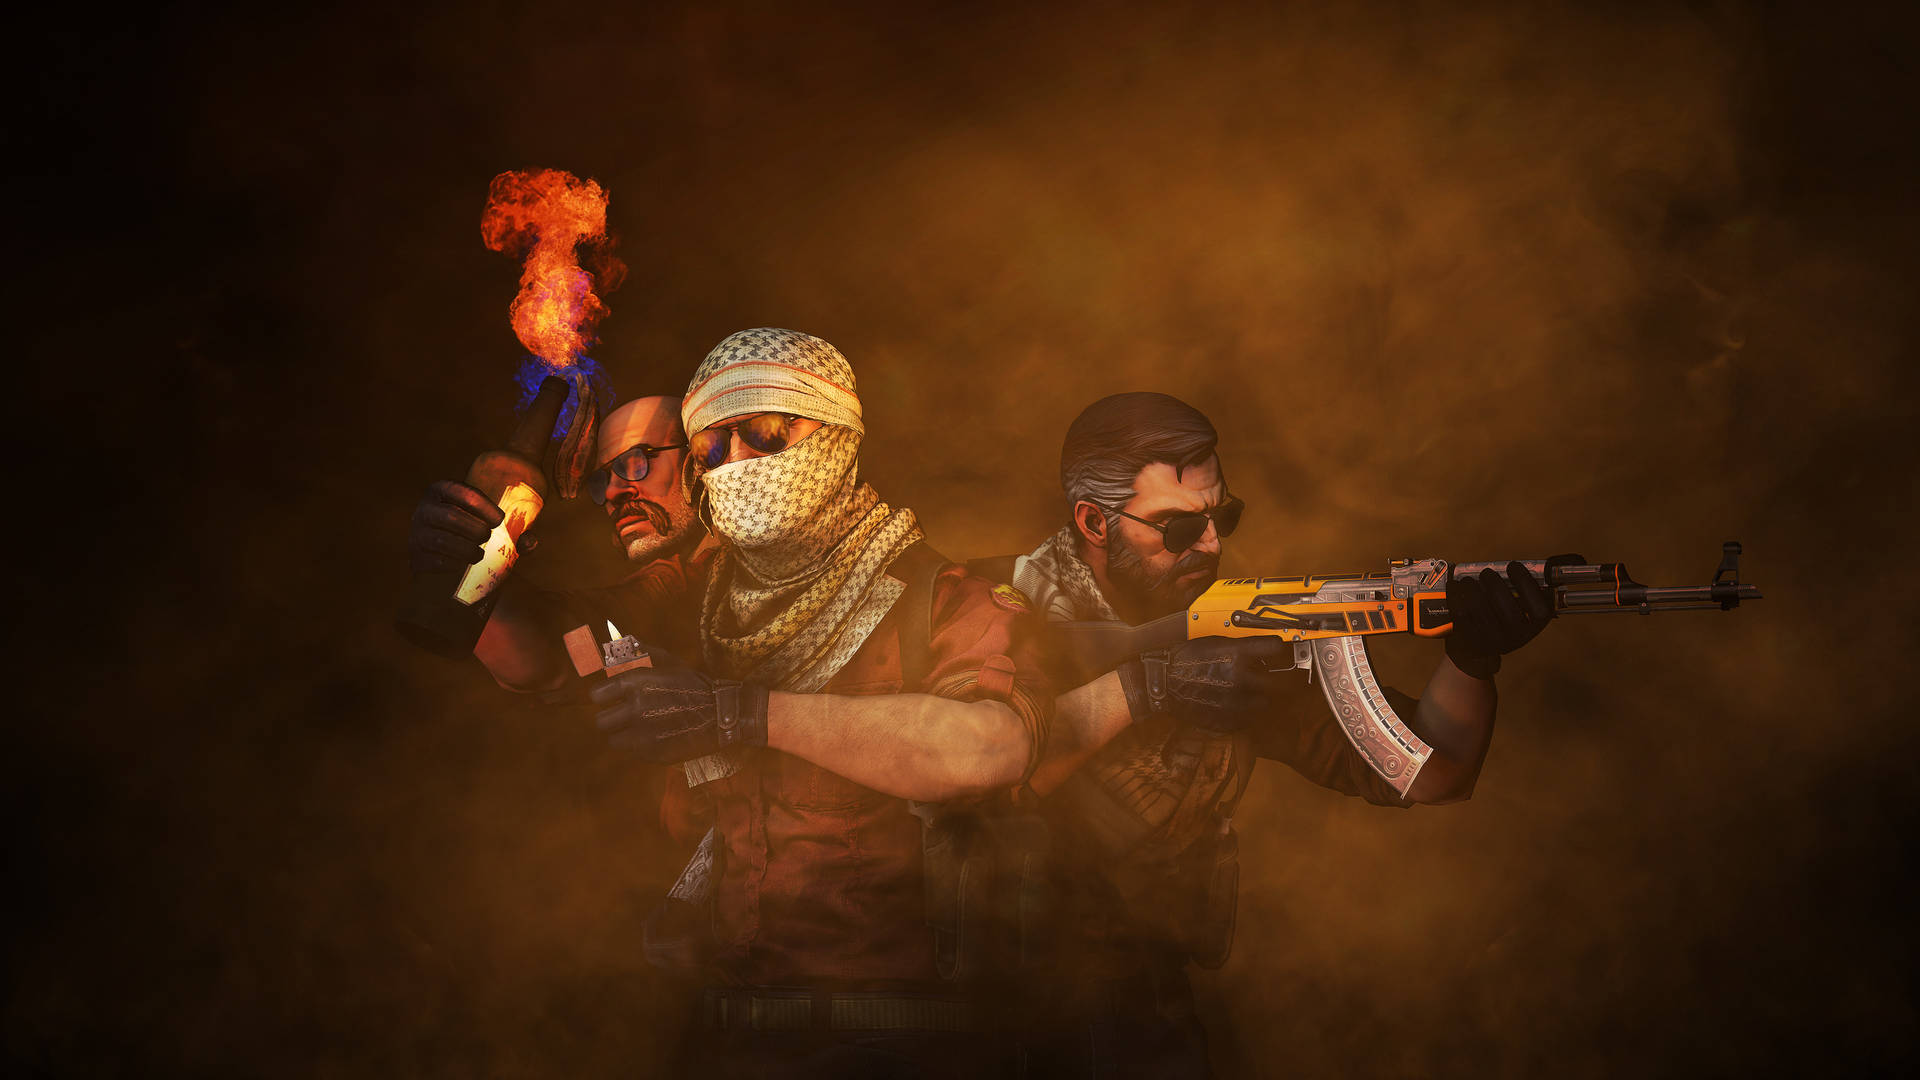 Cs Go Skins Against Smoky Brown Background